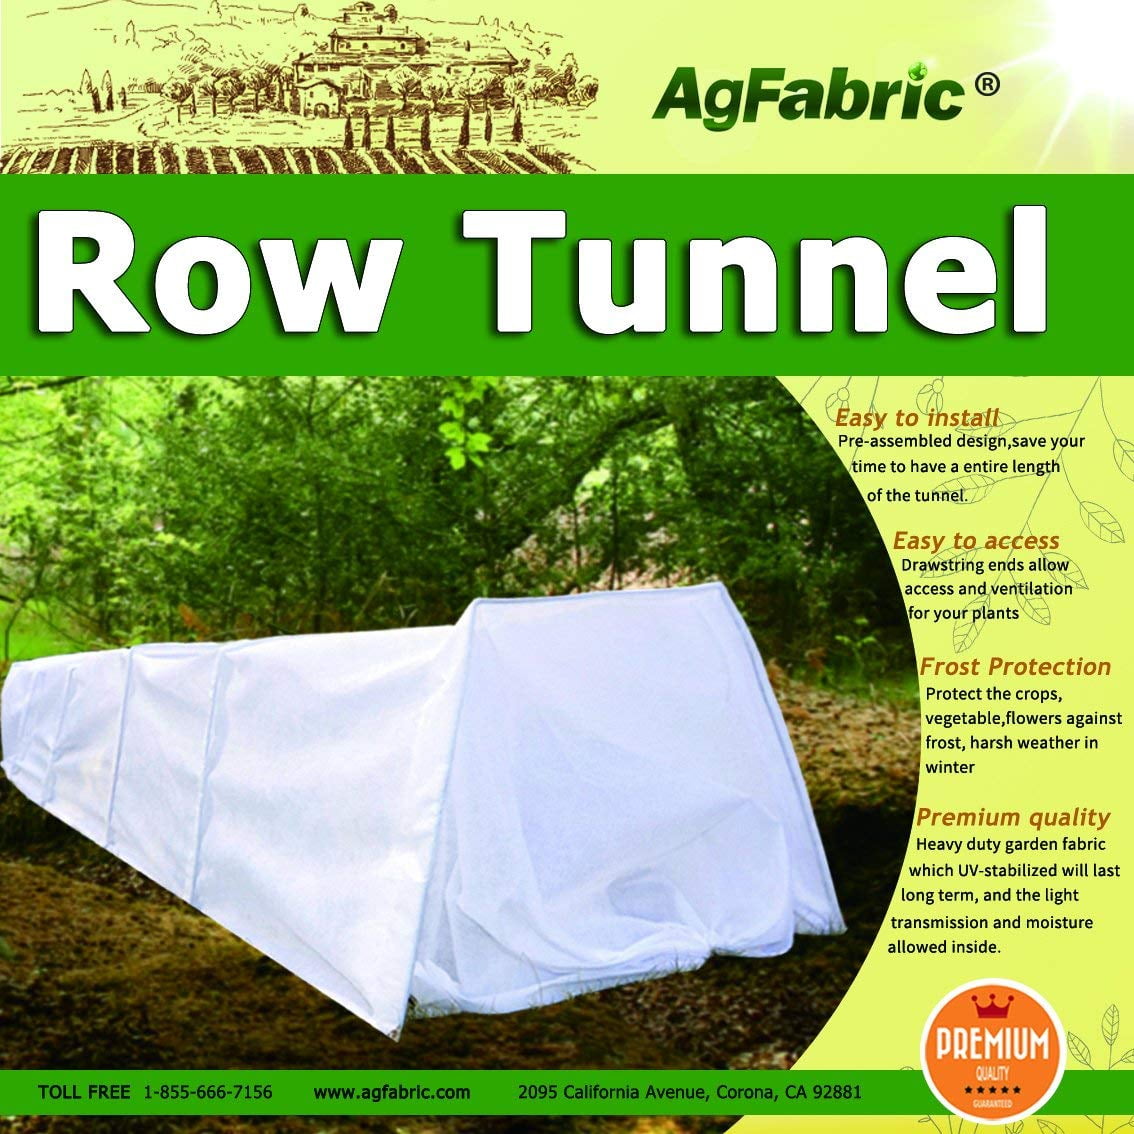 6x20ft Agfabric 1.2Mil Plastic Covering Clear Polyethylene Greenhouse Film UV Resistant for Grow Tunnel and Garden Hoop Plant Cover&Frost Blanket for Season Extension,Keep Warm and Frost Protection 